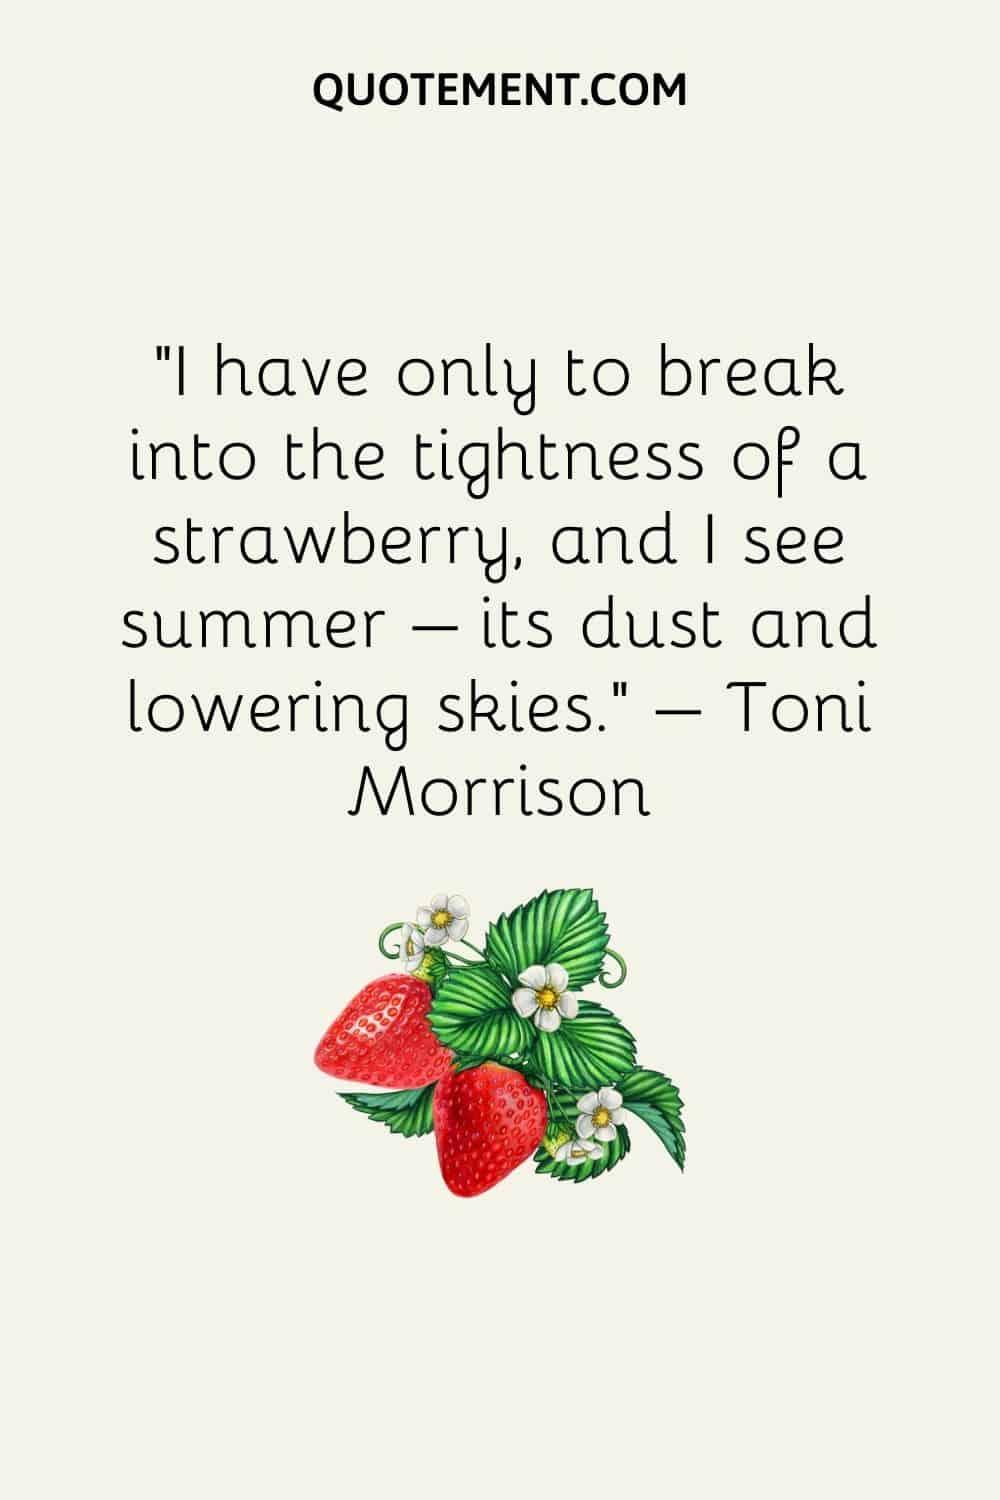 I have only to break into the tightness of a strawberry, and I see summer – its dust and lowering skies